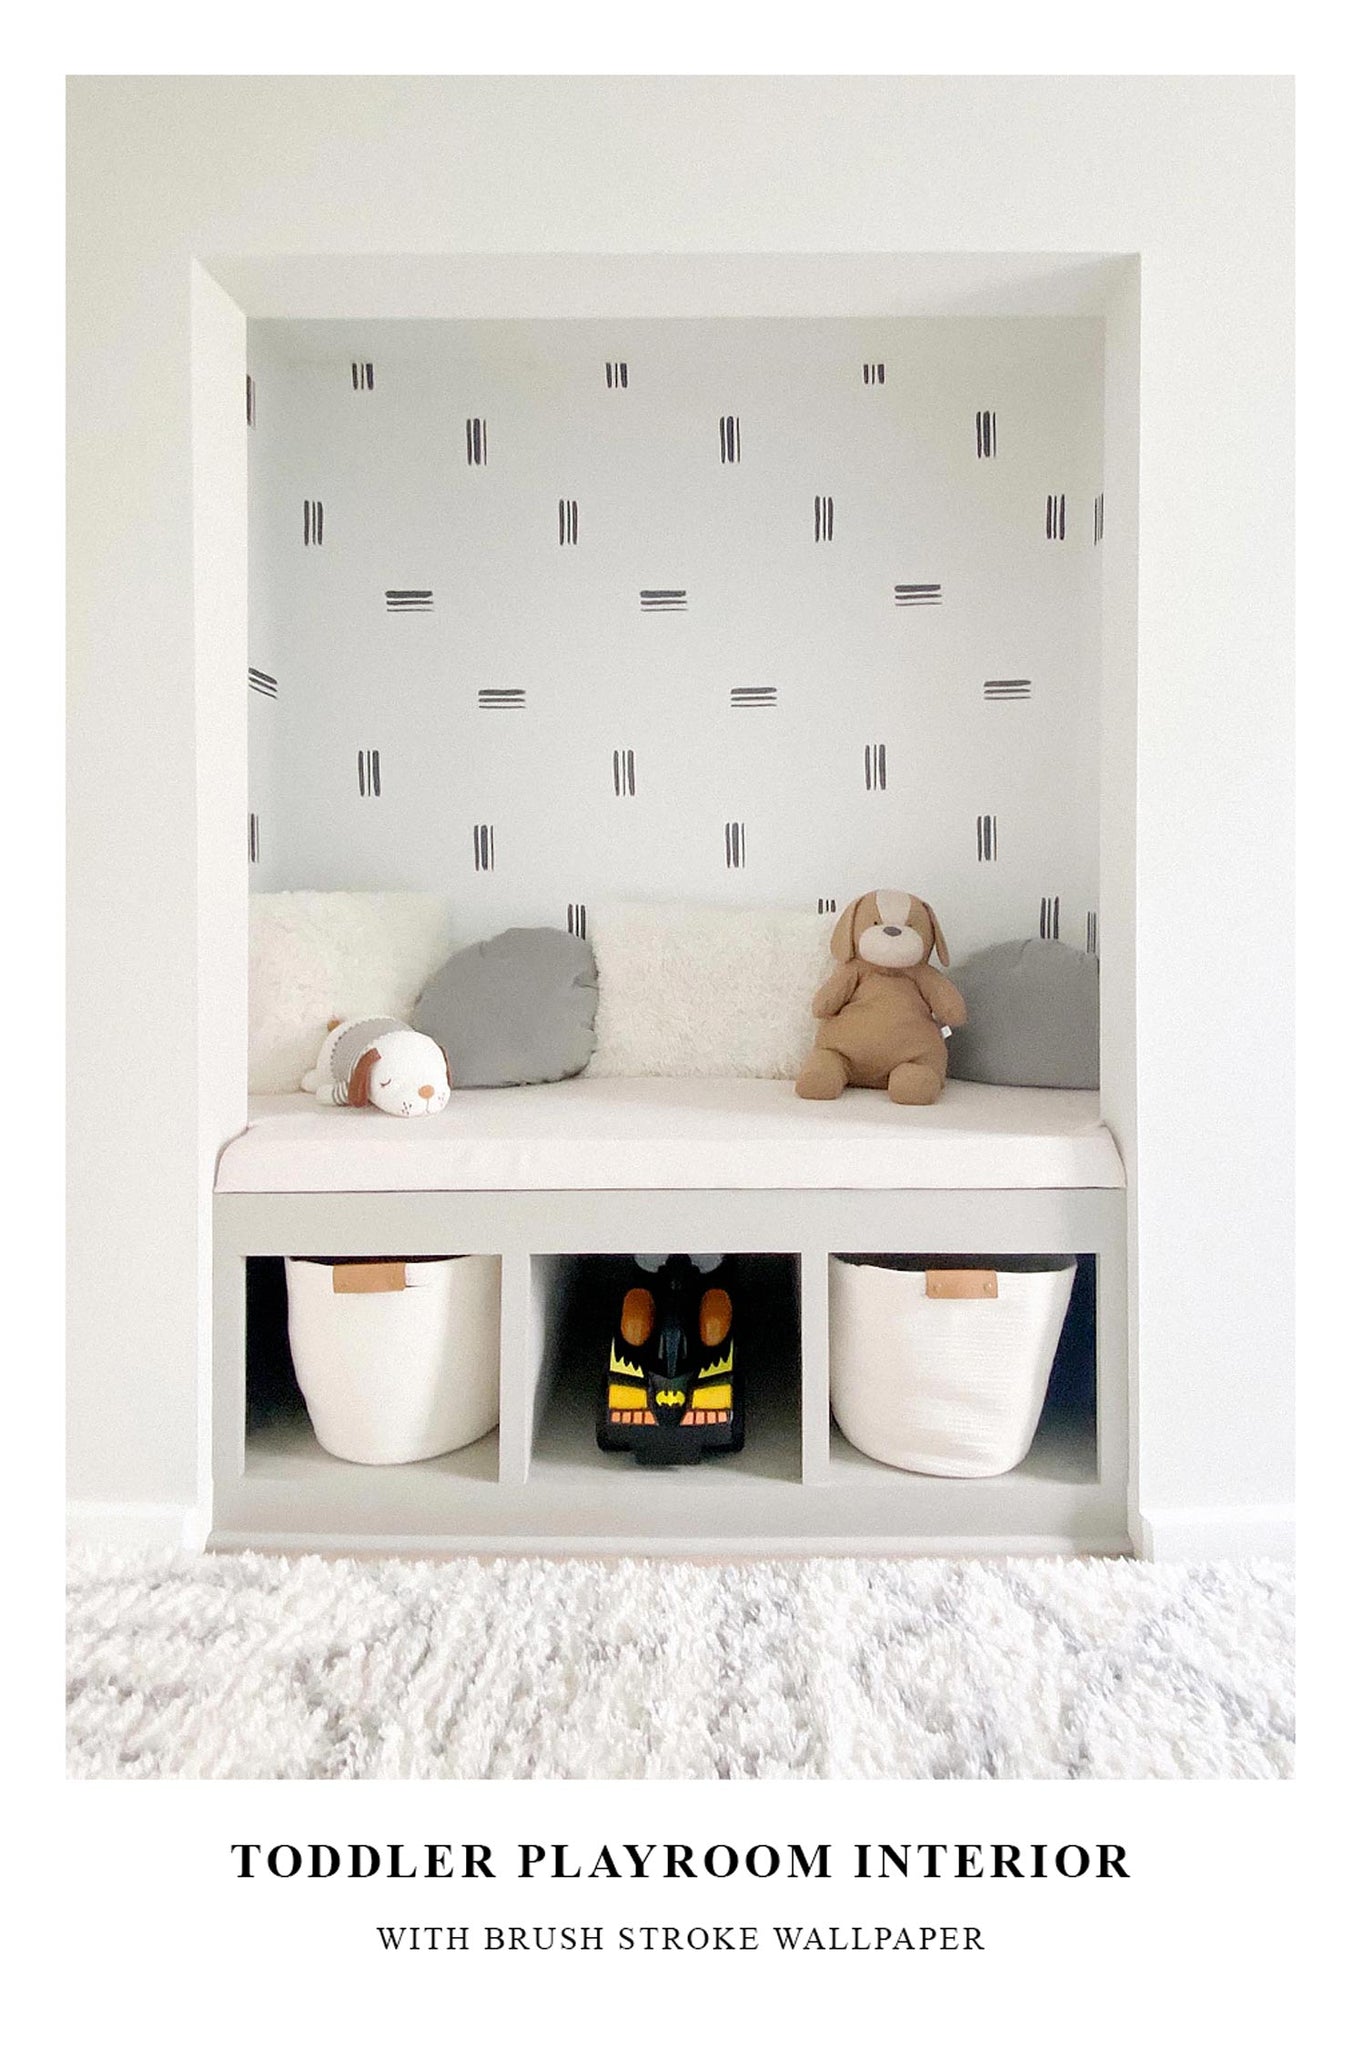 Toddler playroom interior inspiration with minimal brush stroke removable wallpaper in closet reading nook